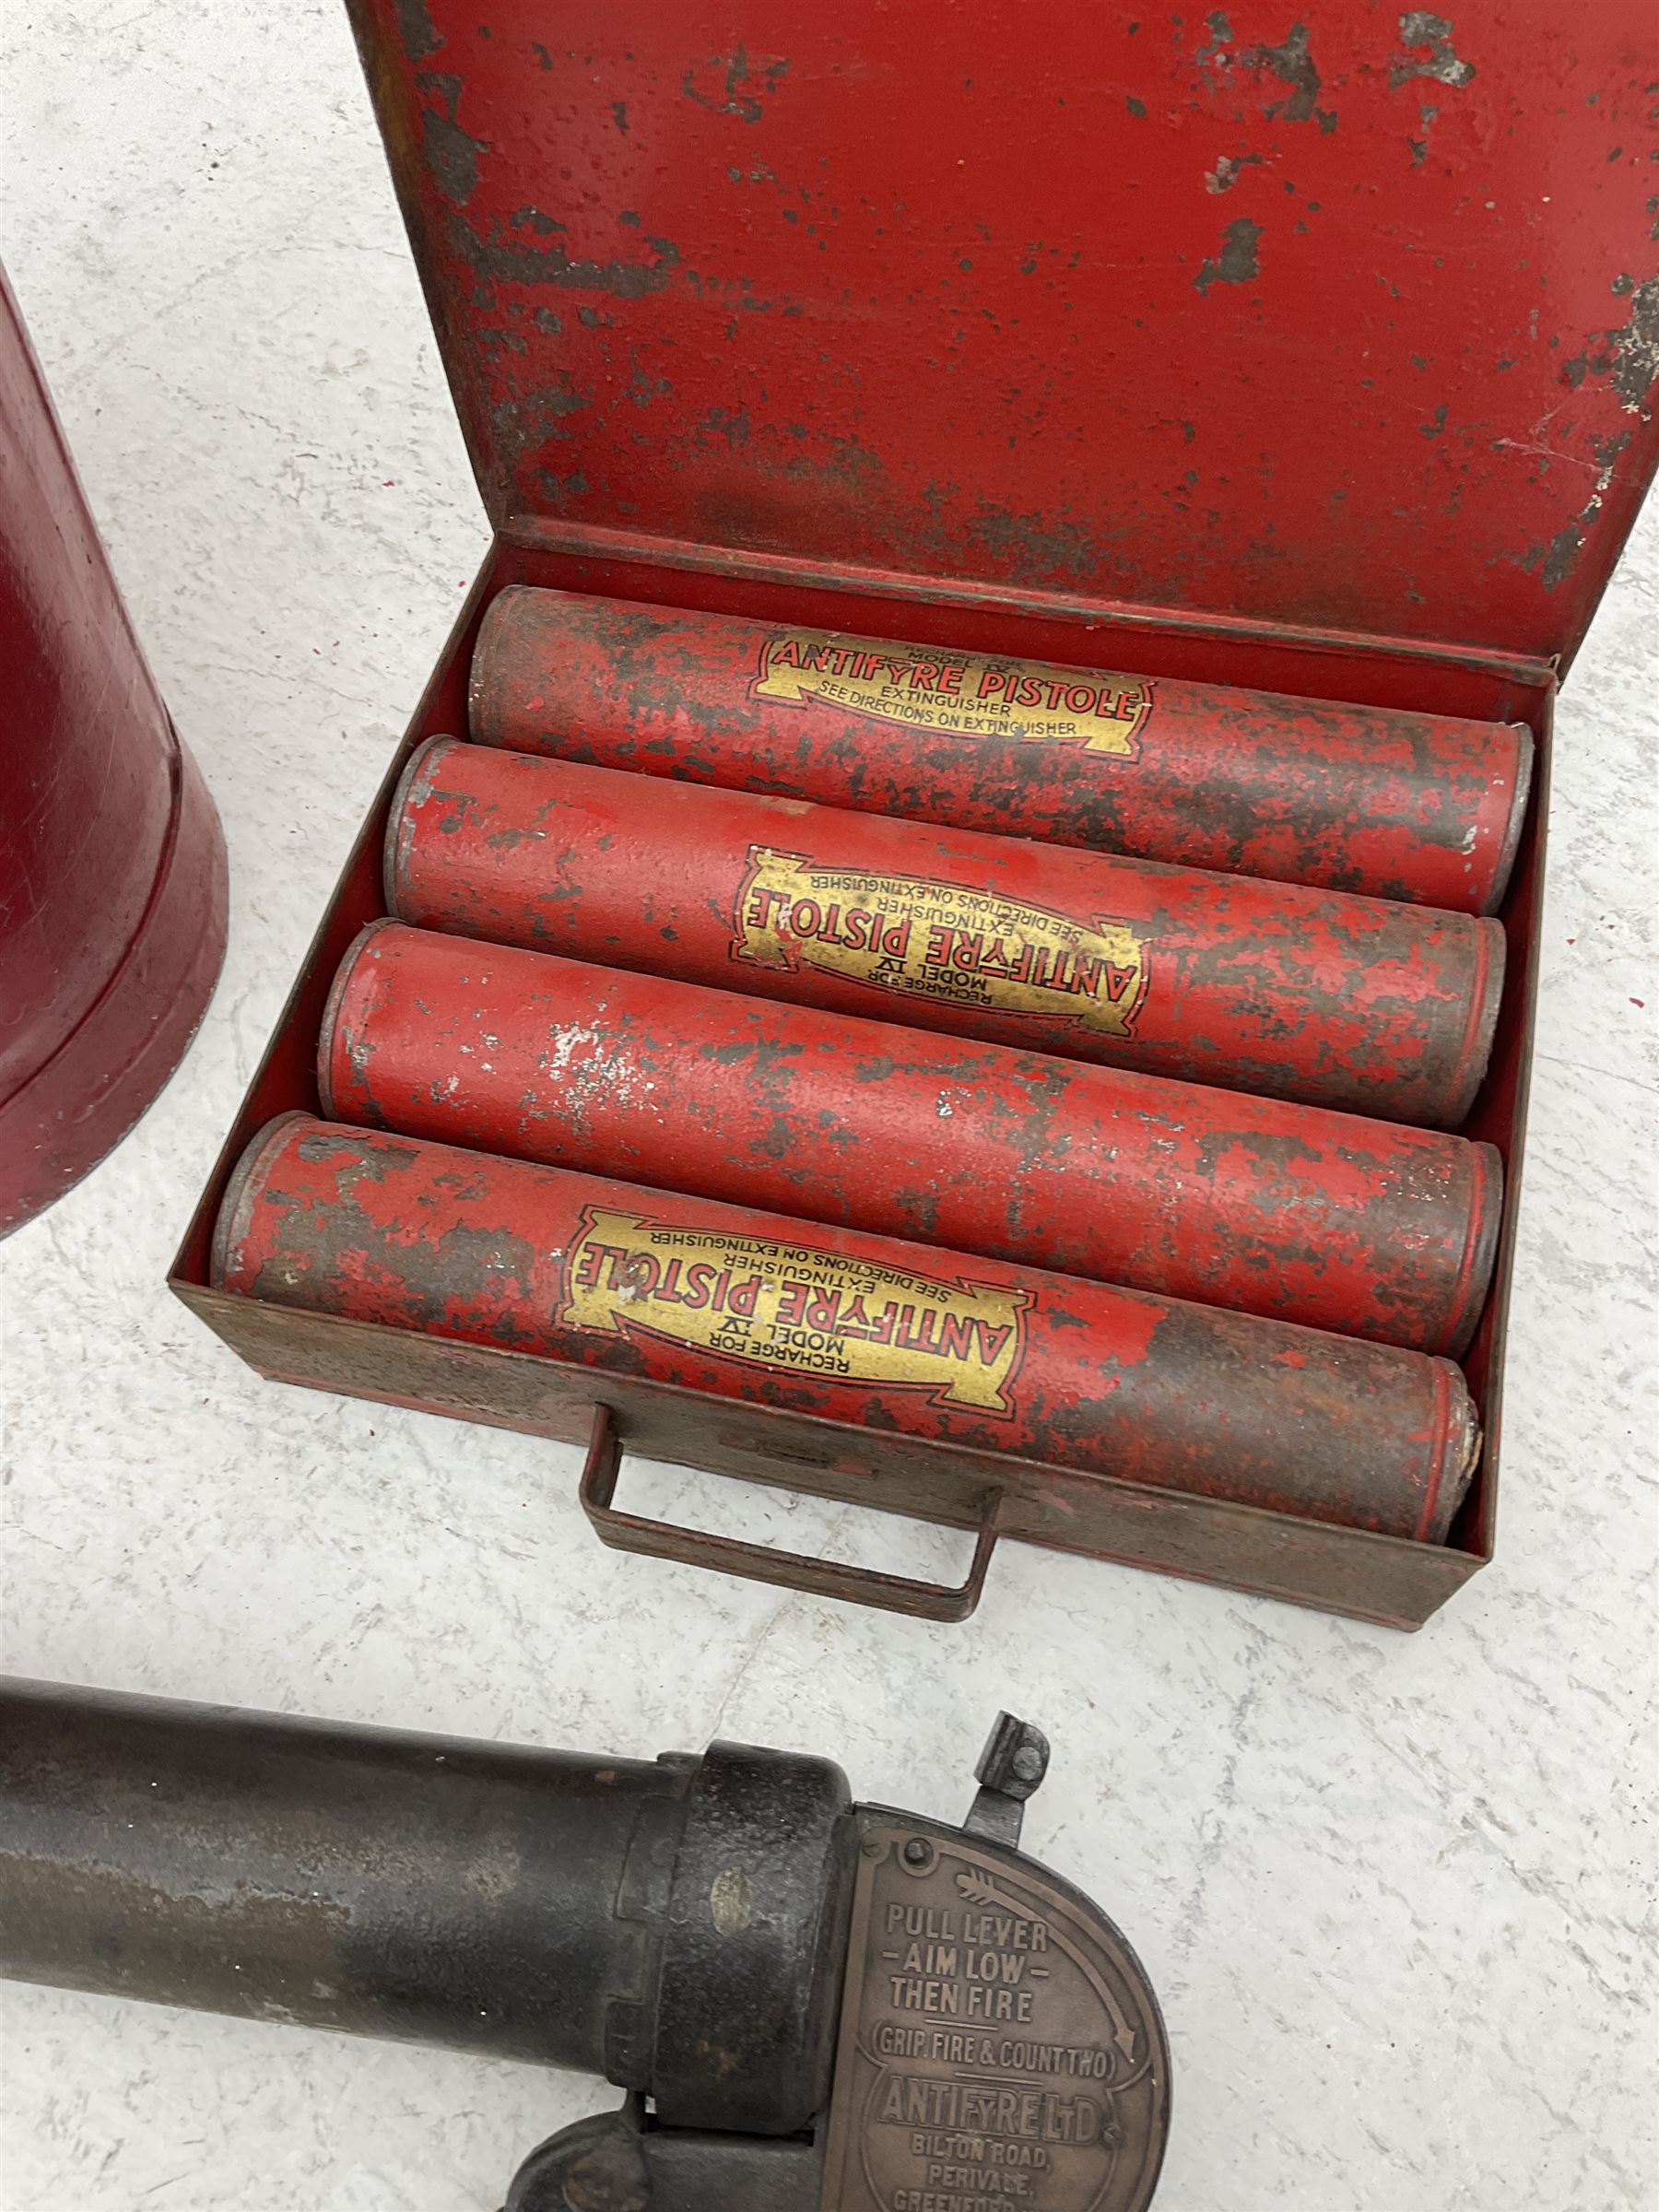 Antifyre Pistole fire extinguisher grenade launcher together with four cartridges (one lacking conte - Image 3 of 4